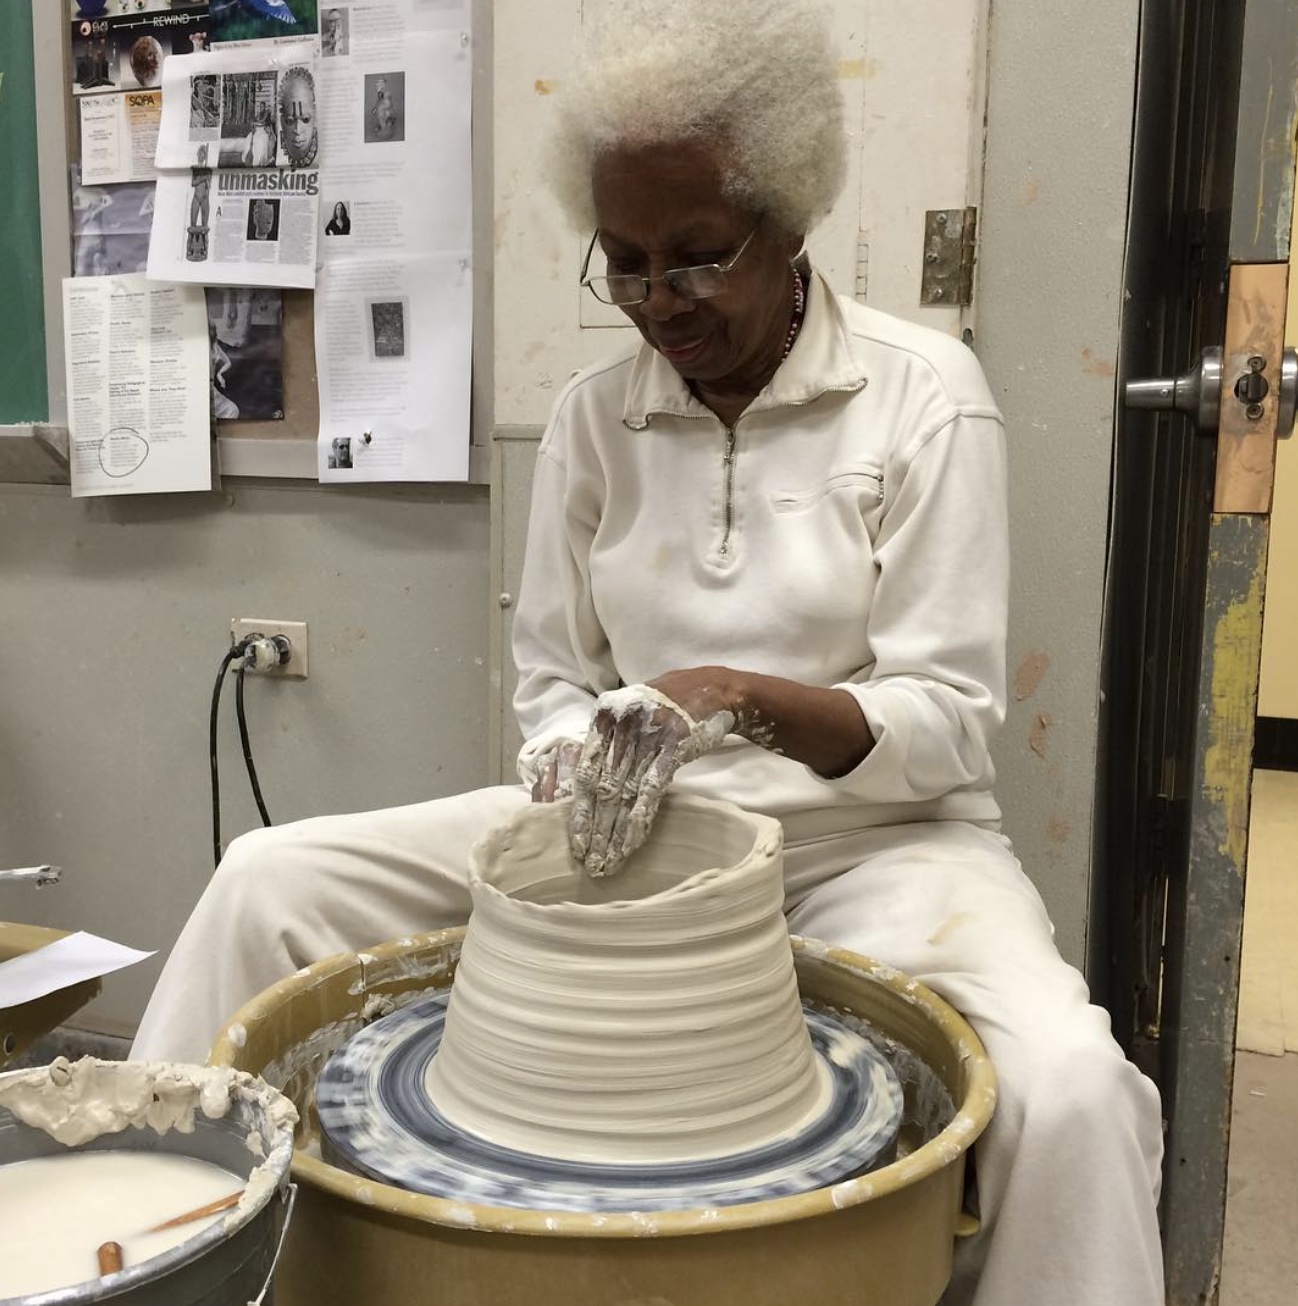 This picture depicts a woman creating pottery on a pottery wheel